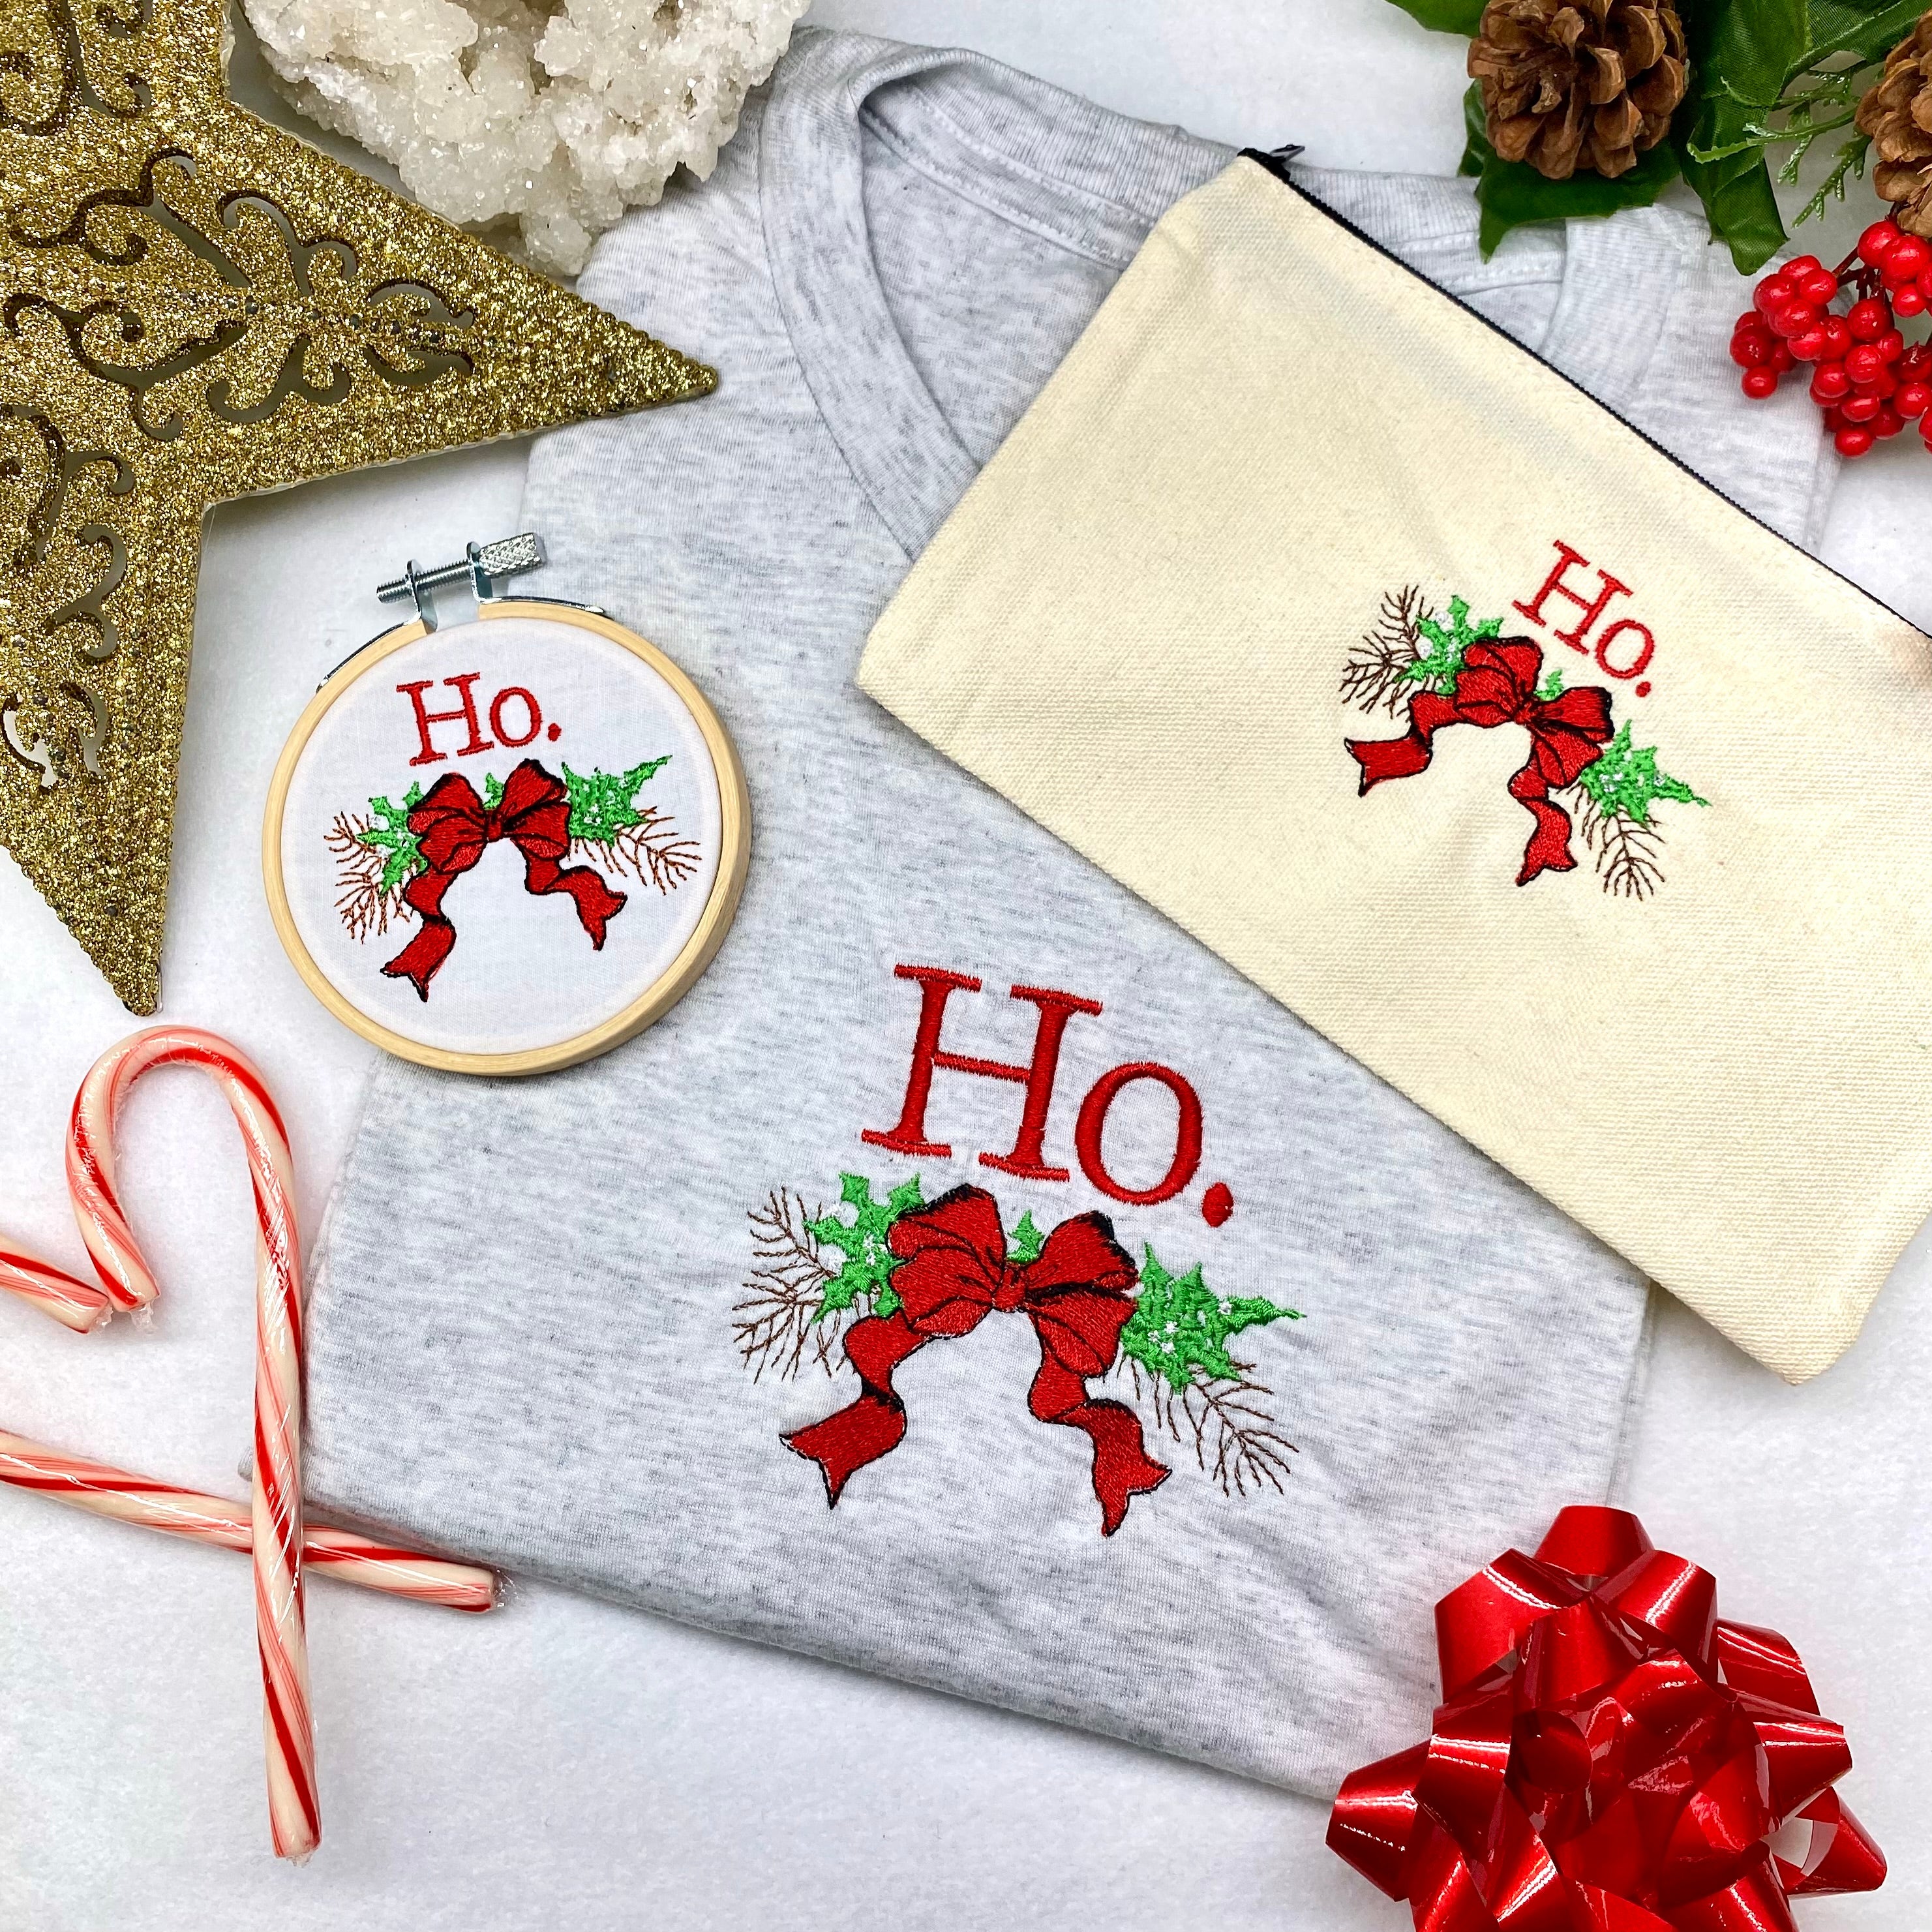 Ho. Christmas Themed with Bow Embroidery Hoop 3-inch